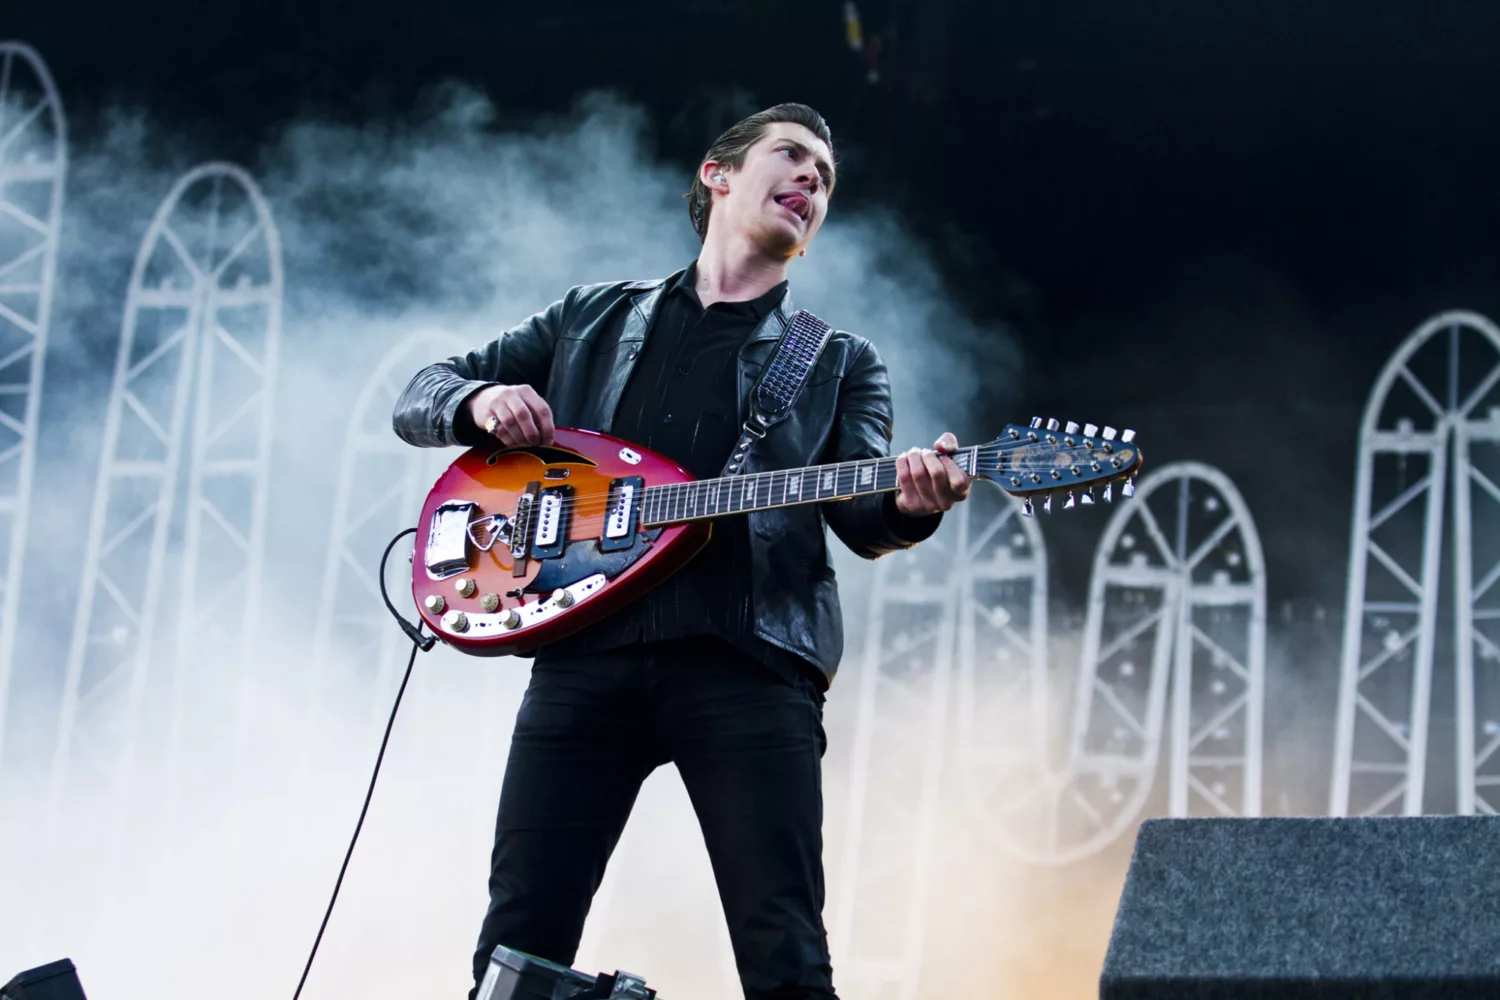 Watch Arctic Monkeys play 'Tranquility Base Hotel & Casino' songs live for the first time